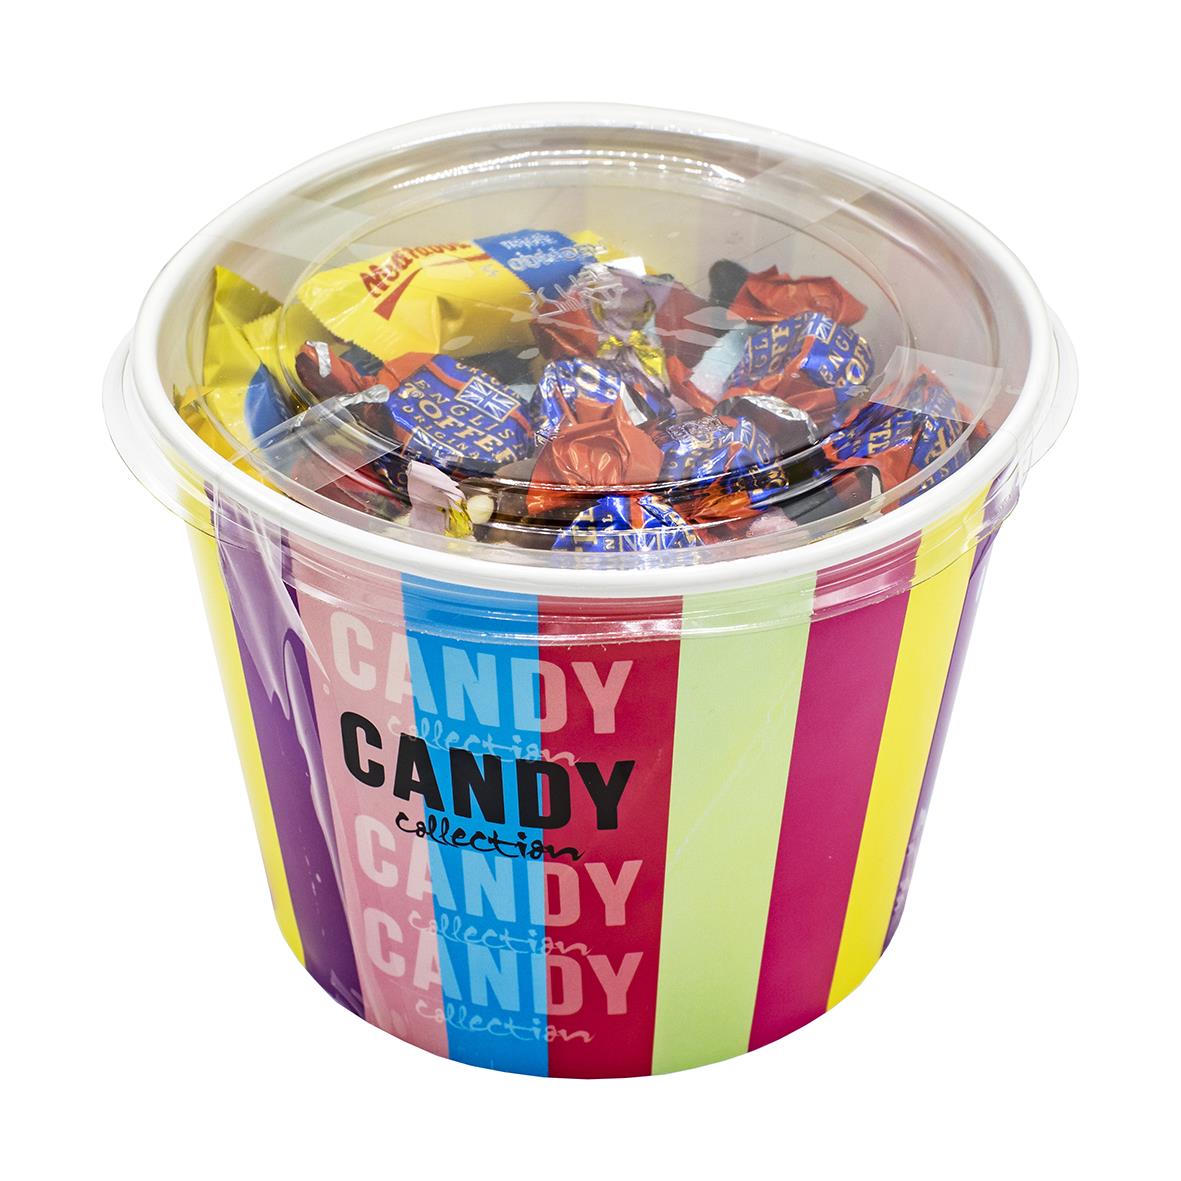 Godis Candy Collection 800g 60010862_1